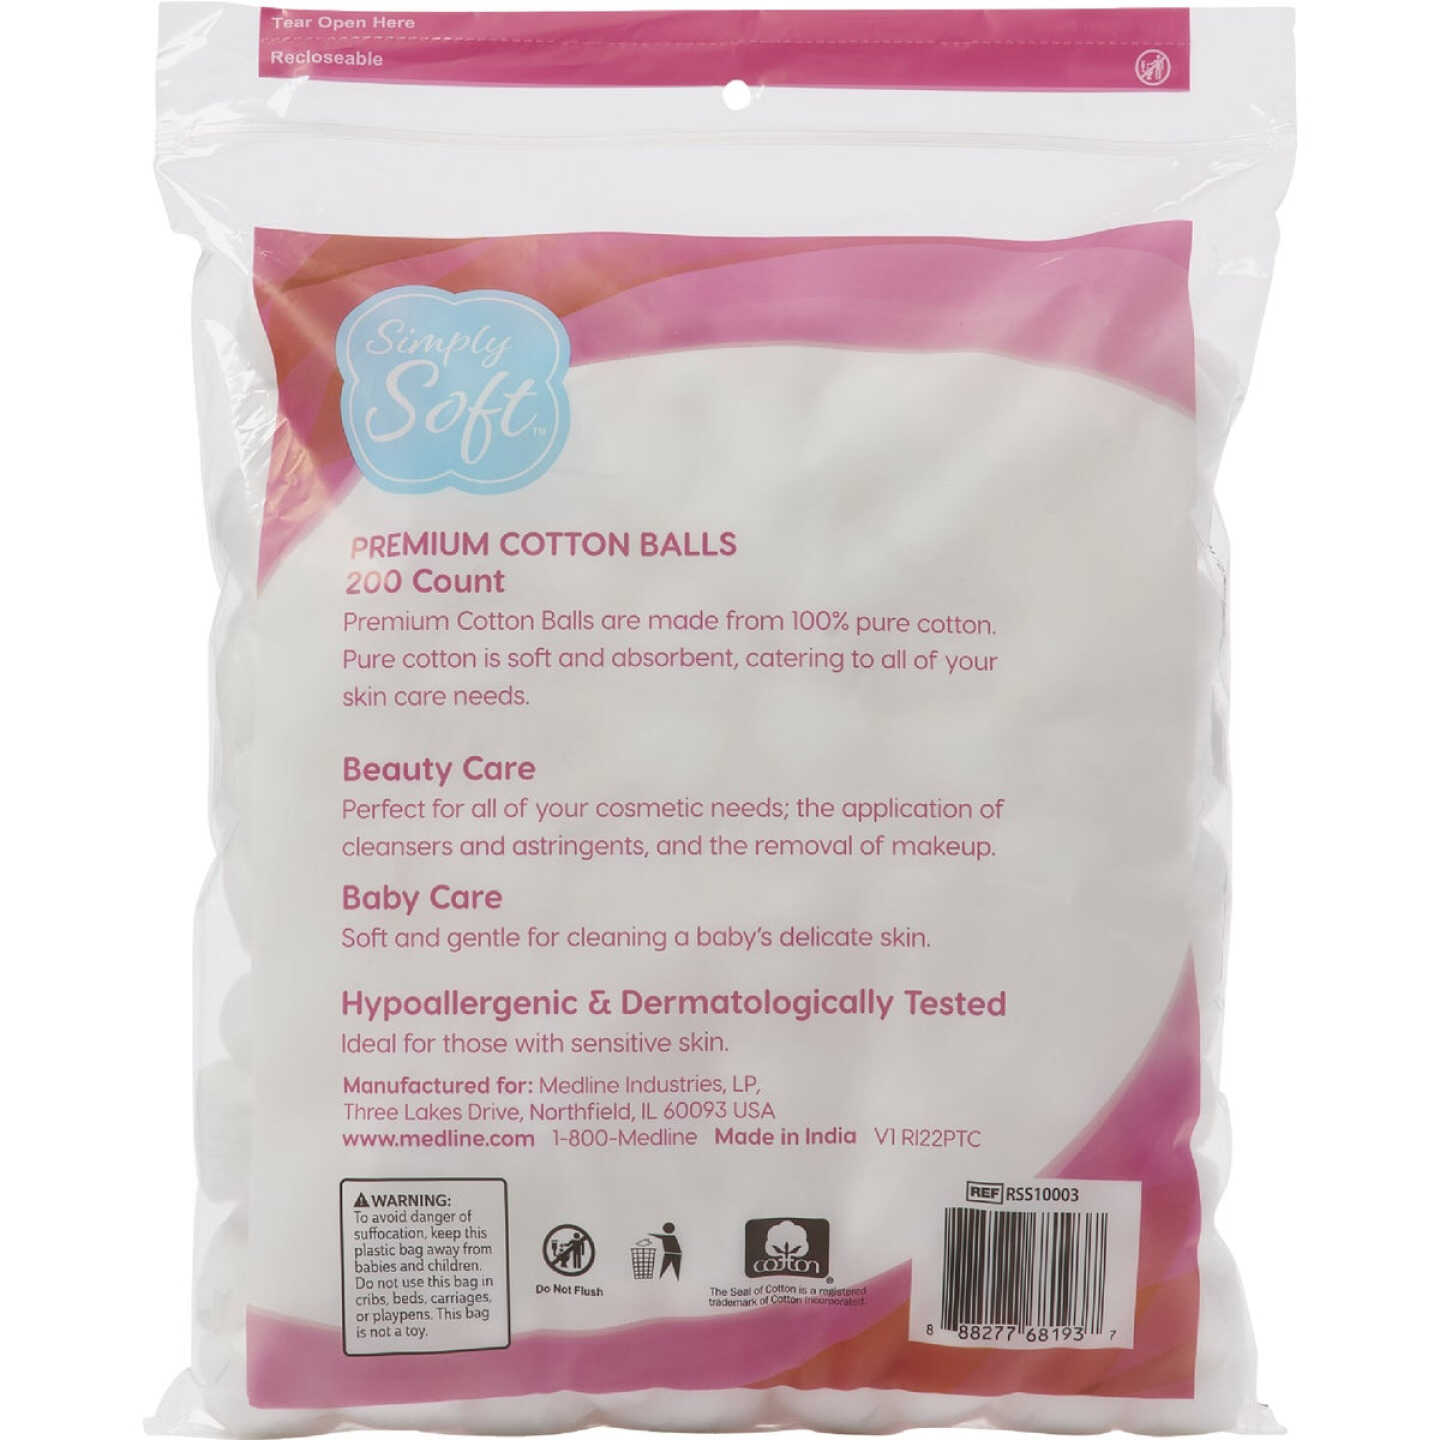 Cotton Balls Jumbo Size for Facial Treatments, Nails and Make-Up Removal,  Applying Tonics & Cleansers, Multi-Purpose Soft Natural Cotton Balls